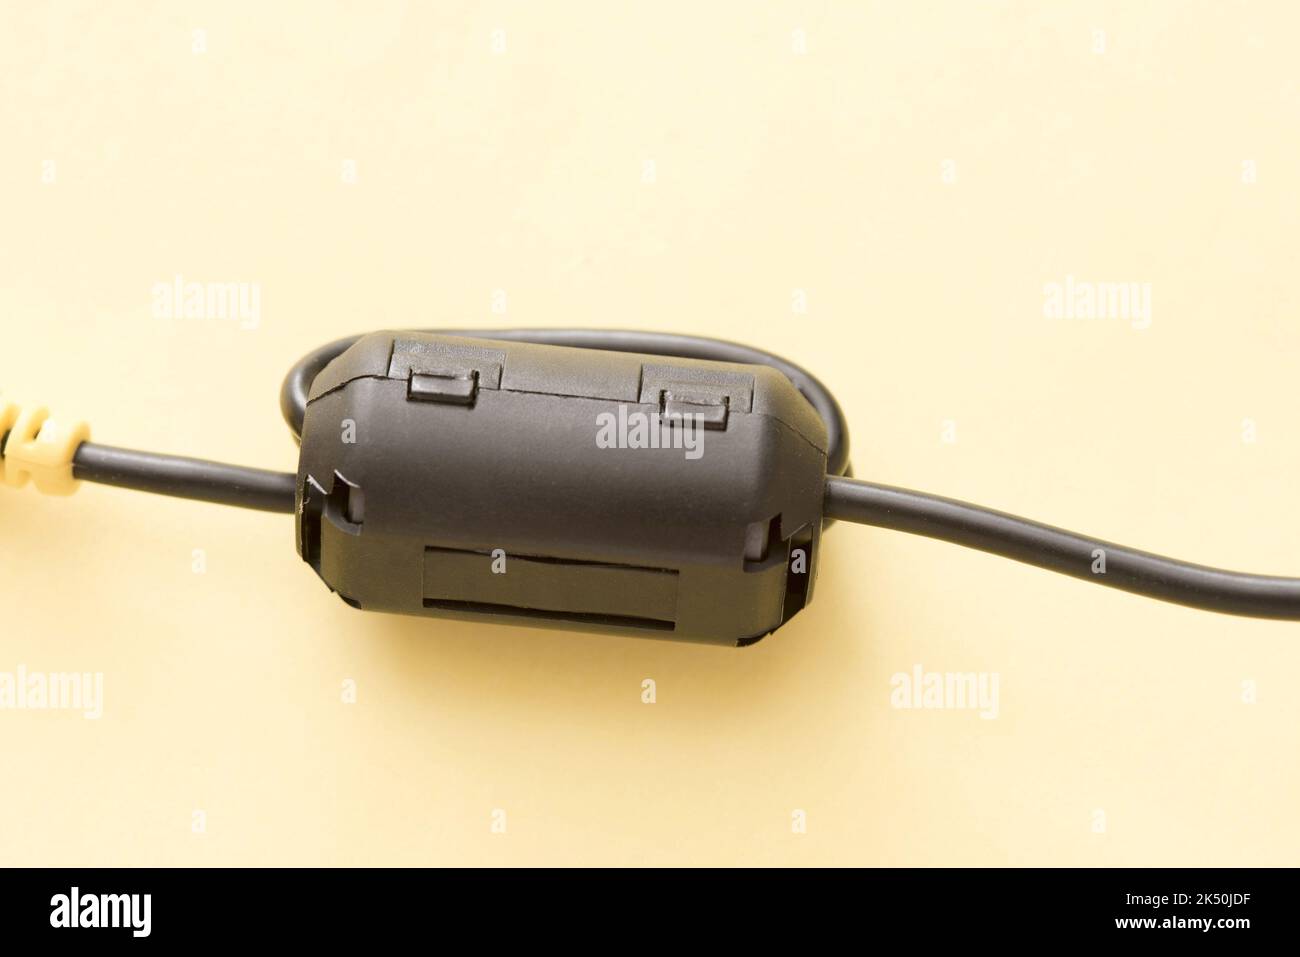 Close up of a black ferrite bead attached to a cable, isolated on a plain background. Stock Photo